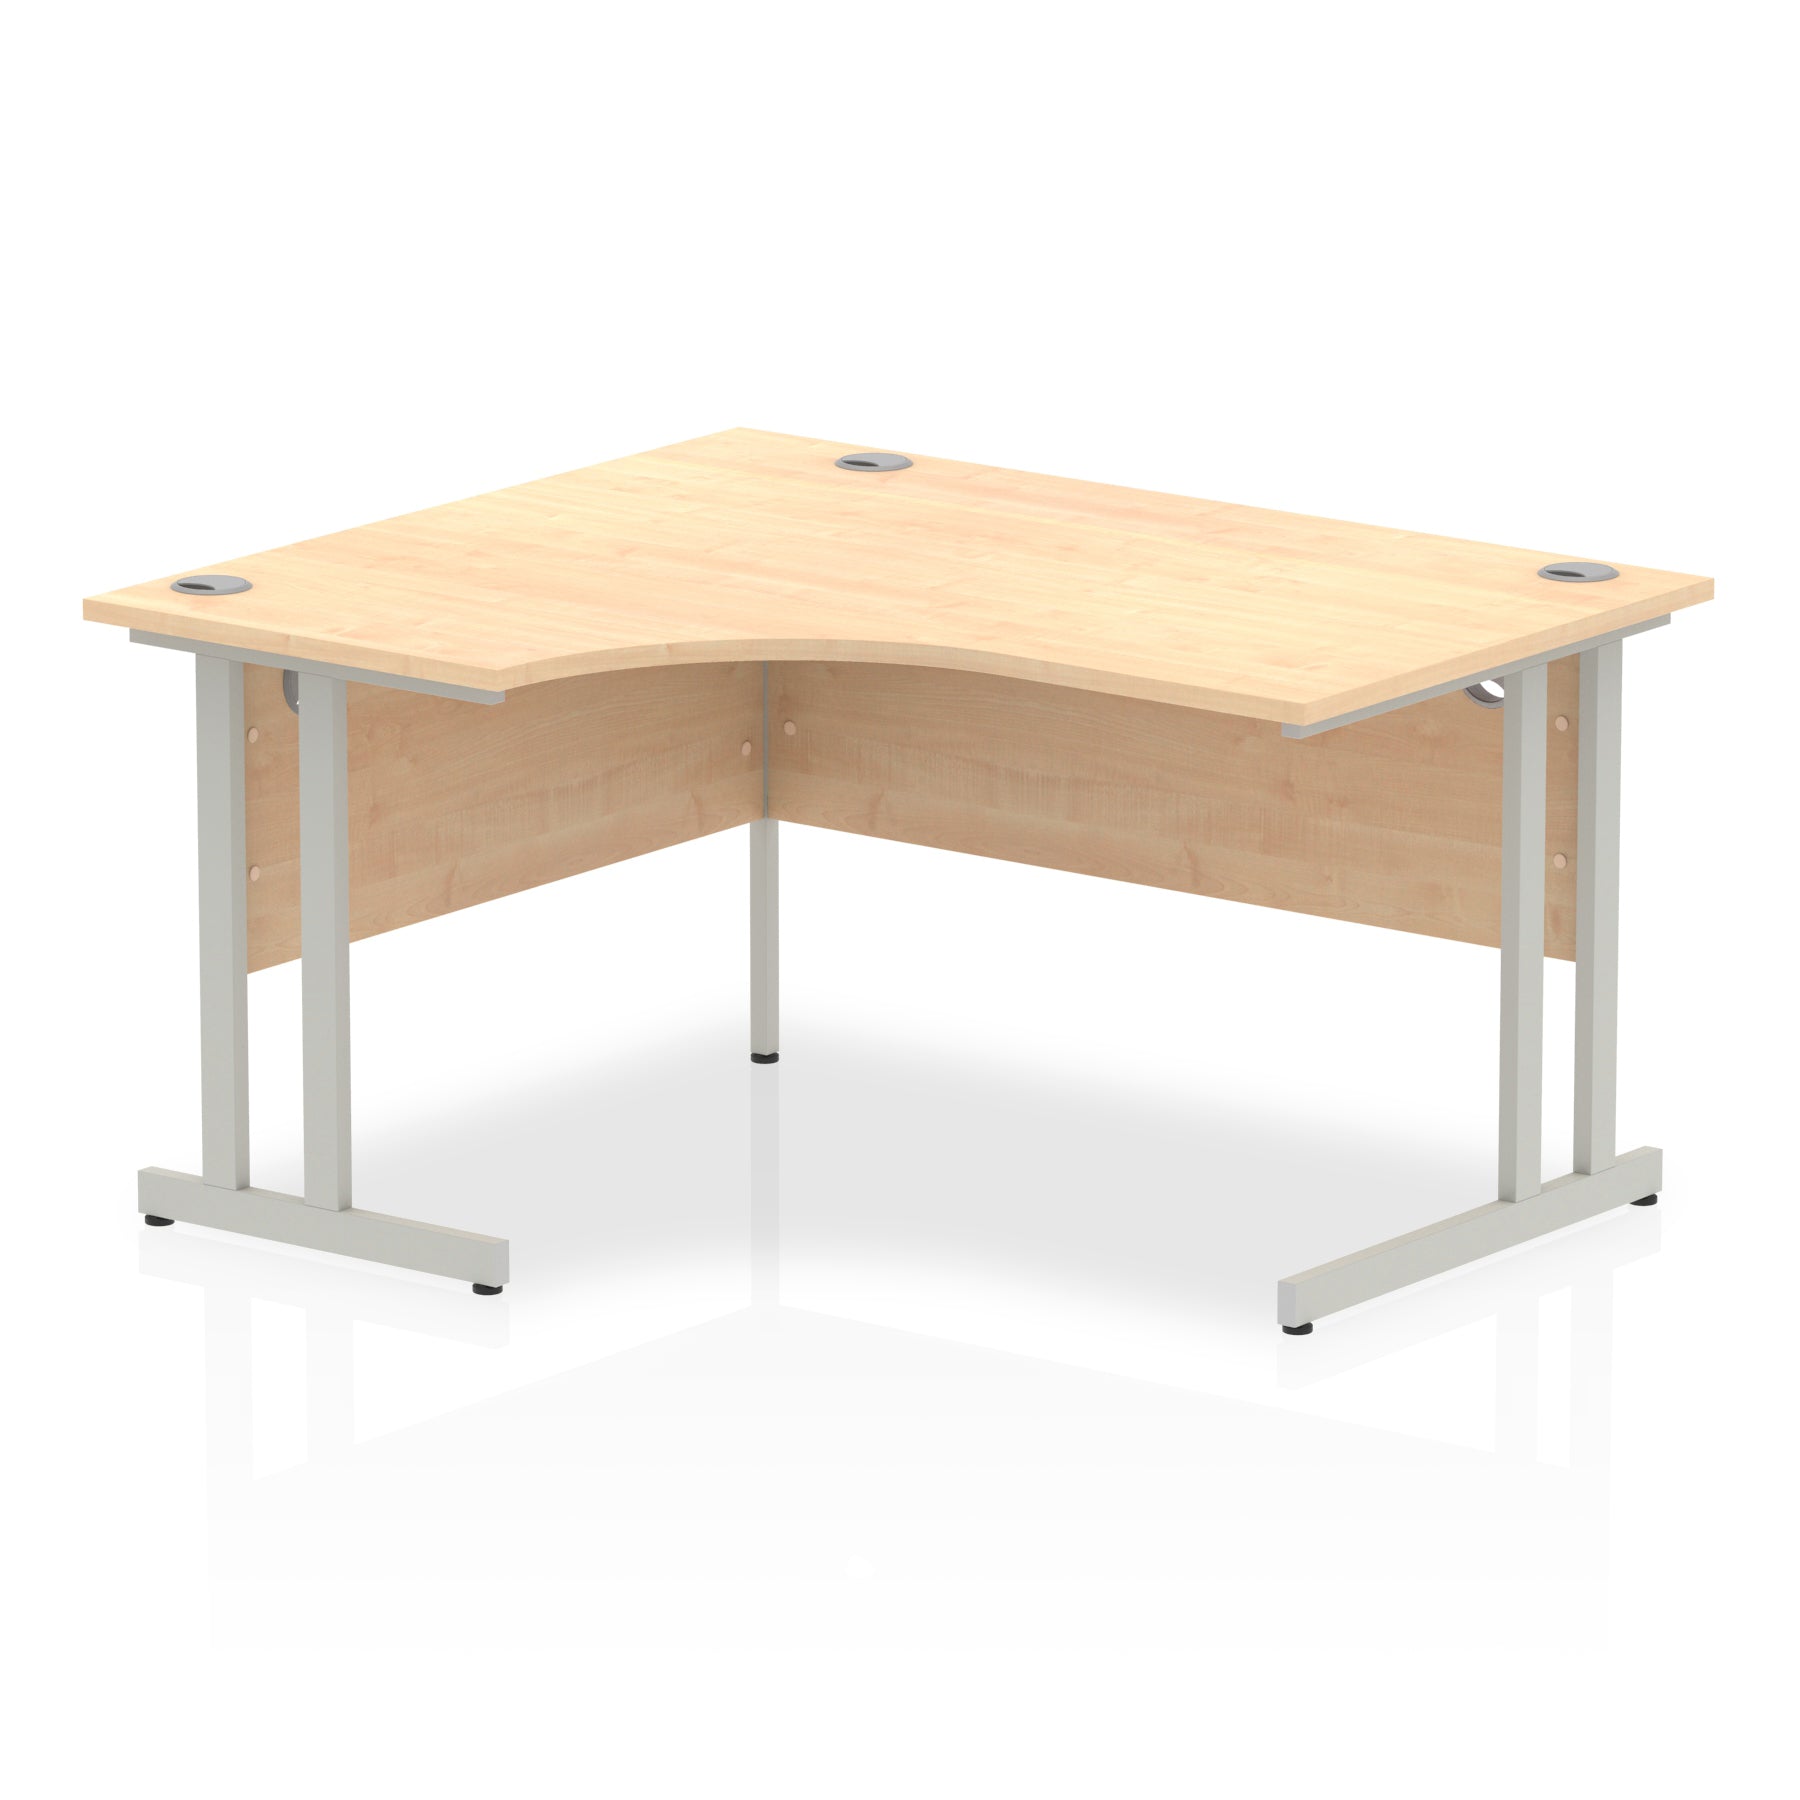 Impulse 1400mm Left Crescent Desk Cantilever Leg - MFC Material, 1400x1200 Top, Silver/White/Black Frame, 5-Year Guarantee, Self-Assembly